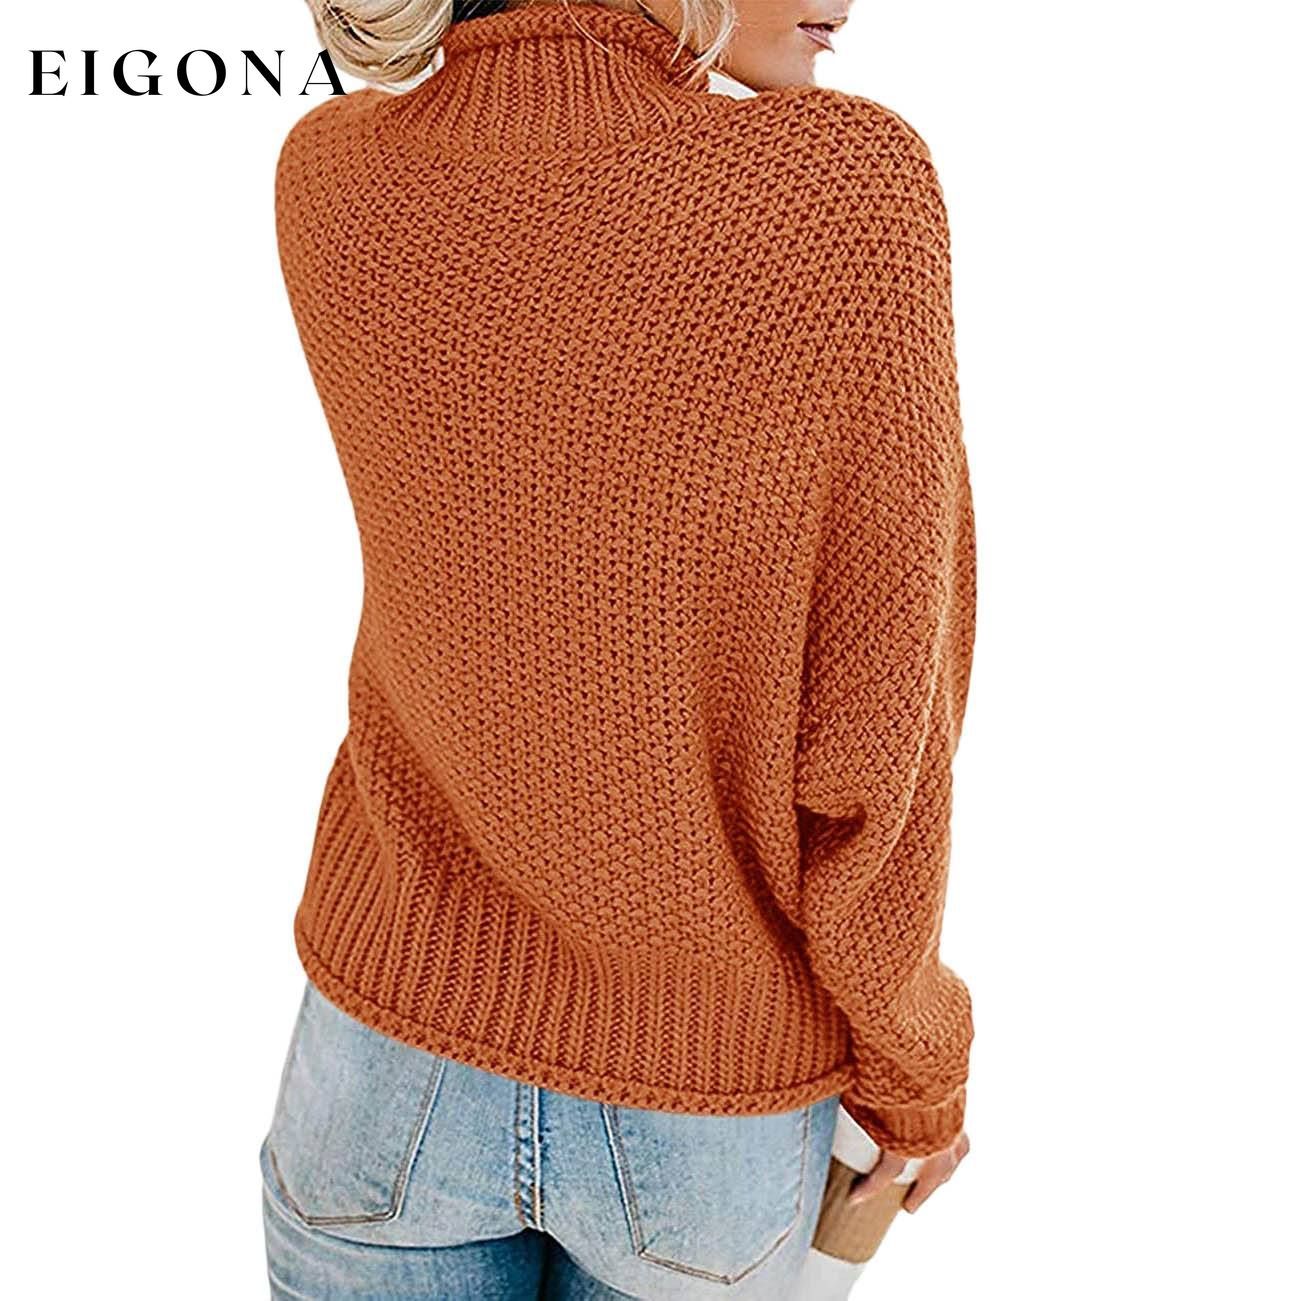 Women's Turtleneck Batwing Sleeve Loose Oversized Chunky Knitted Pullover Sweater Jumper Tops __stock:500 clothes refund_fee:1200 tops